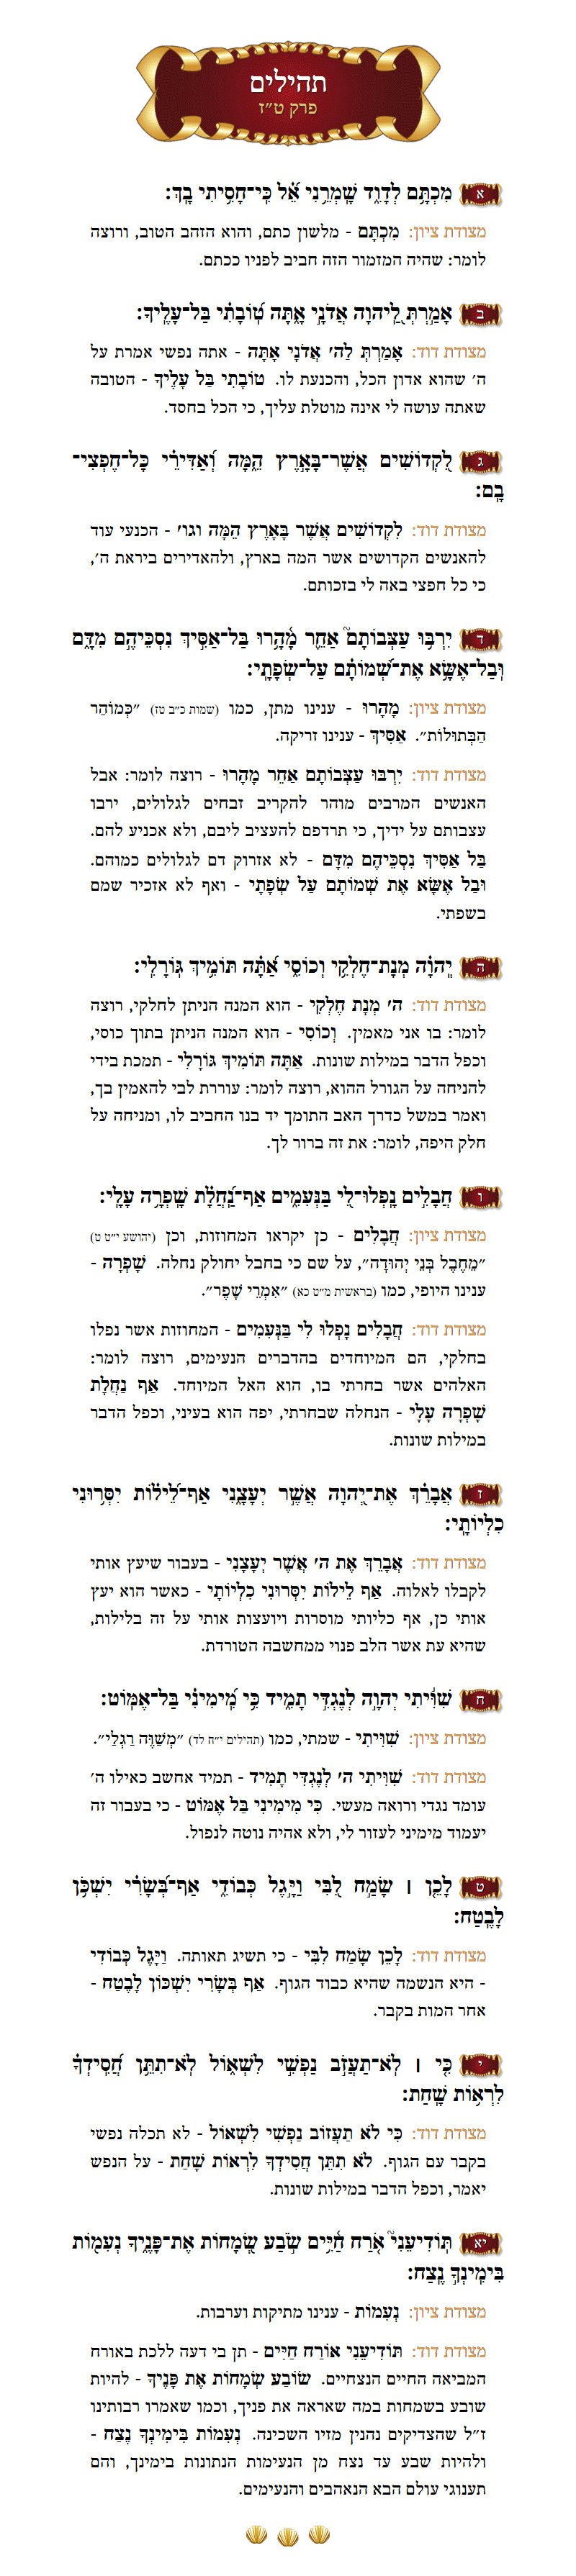 Sefer Tehillim Chapter 106 with commentary